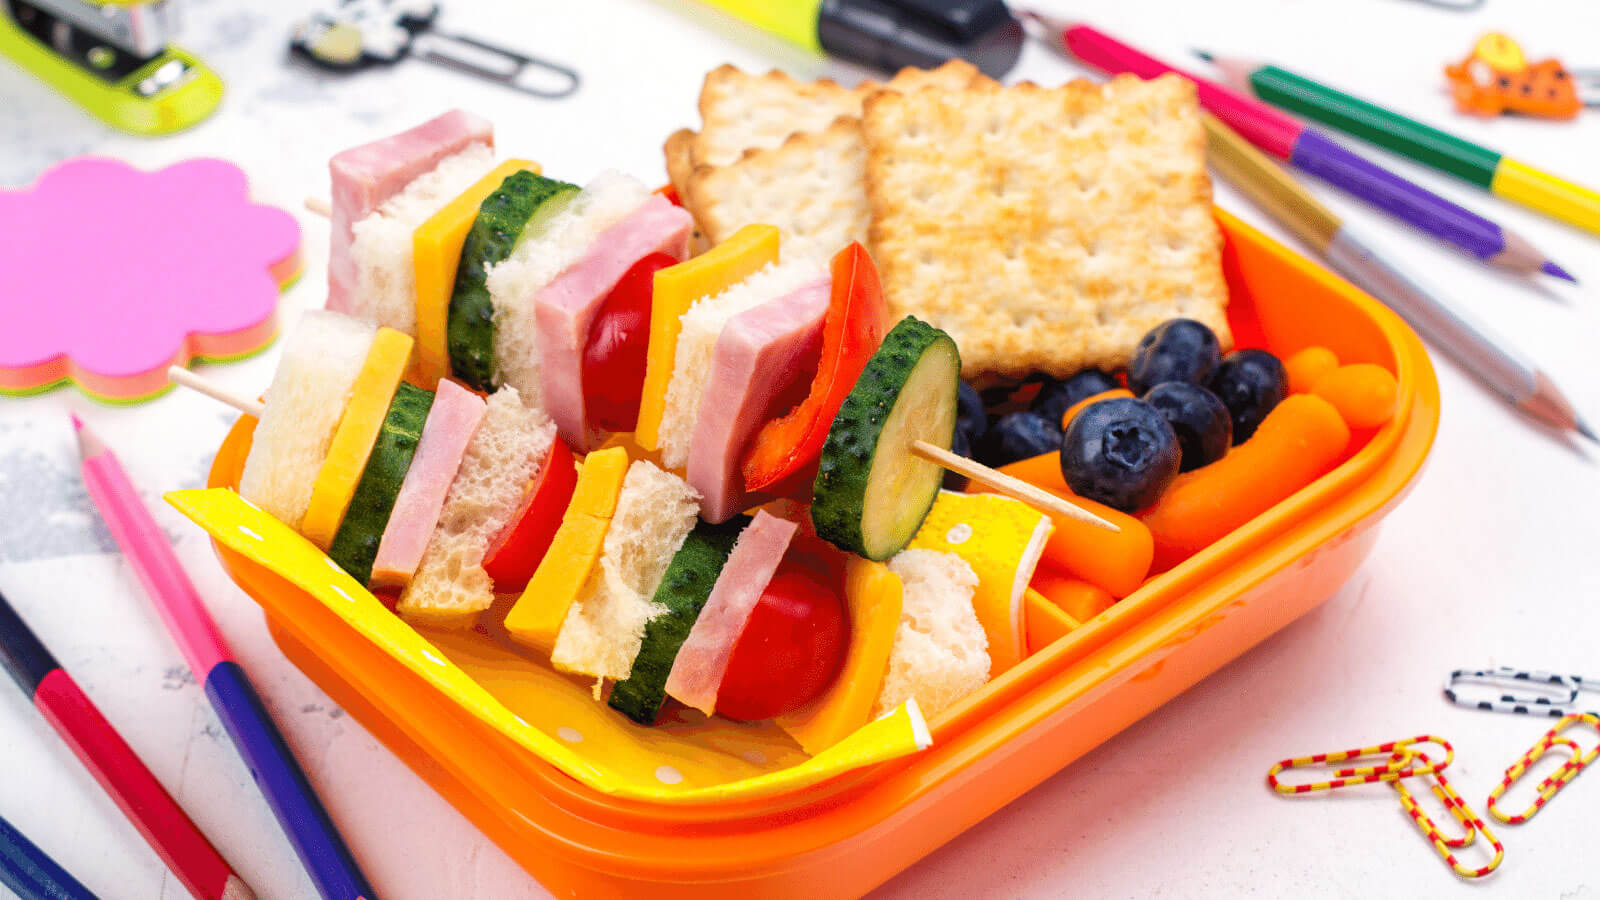 Open lunchbox with school supplies.